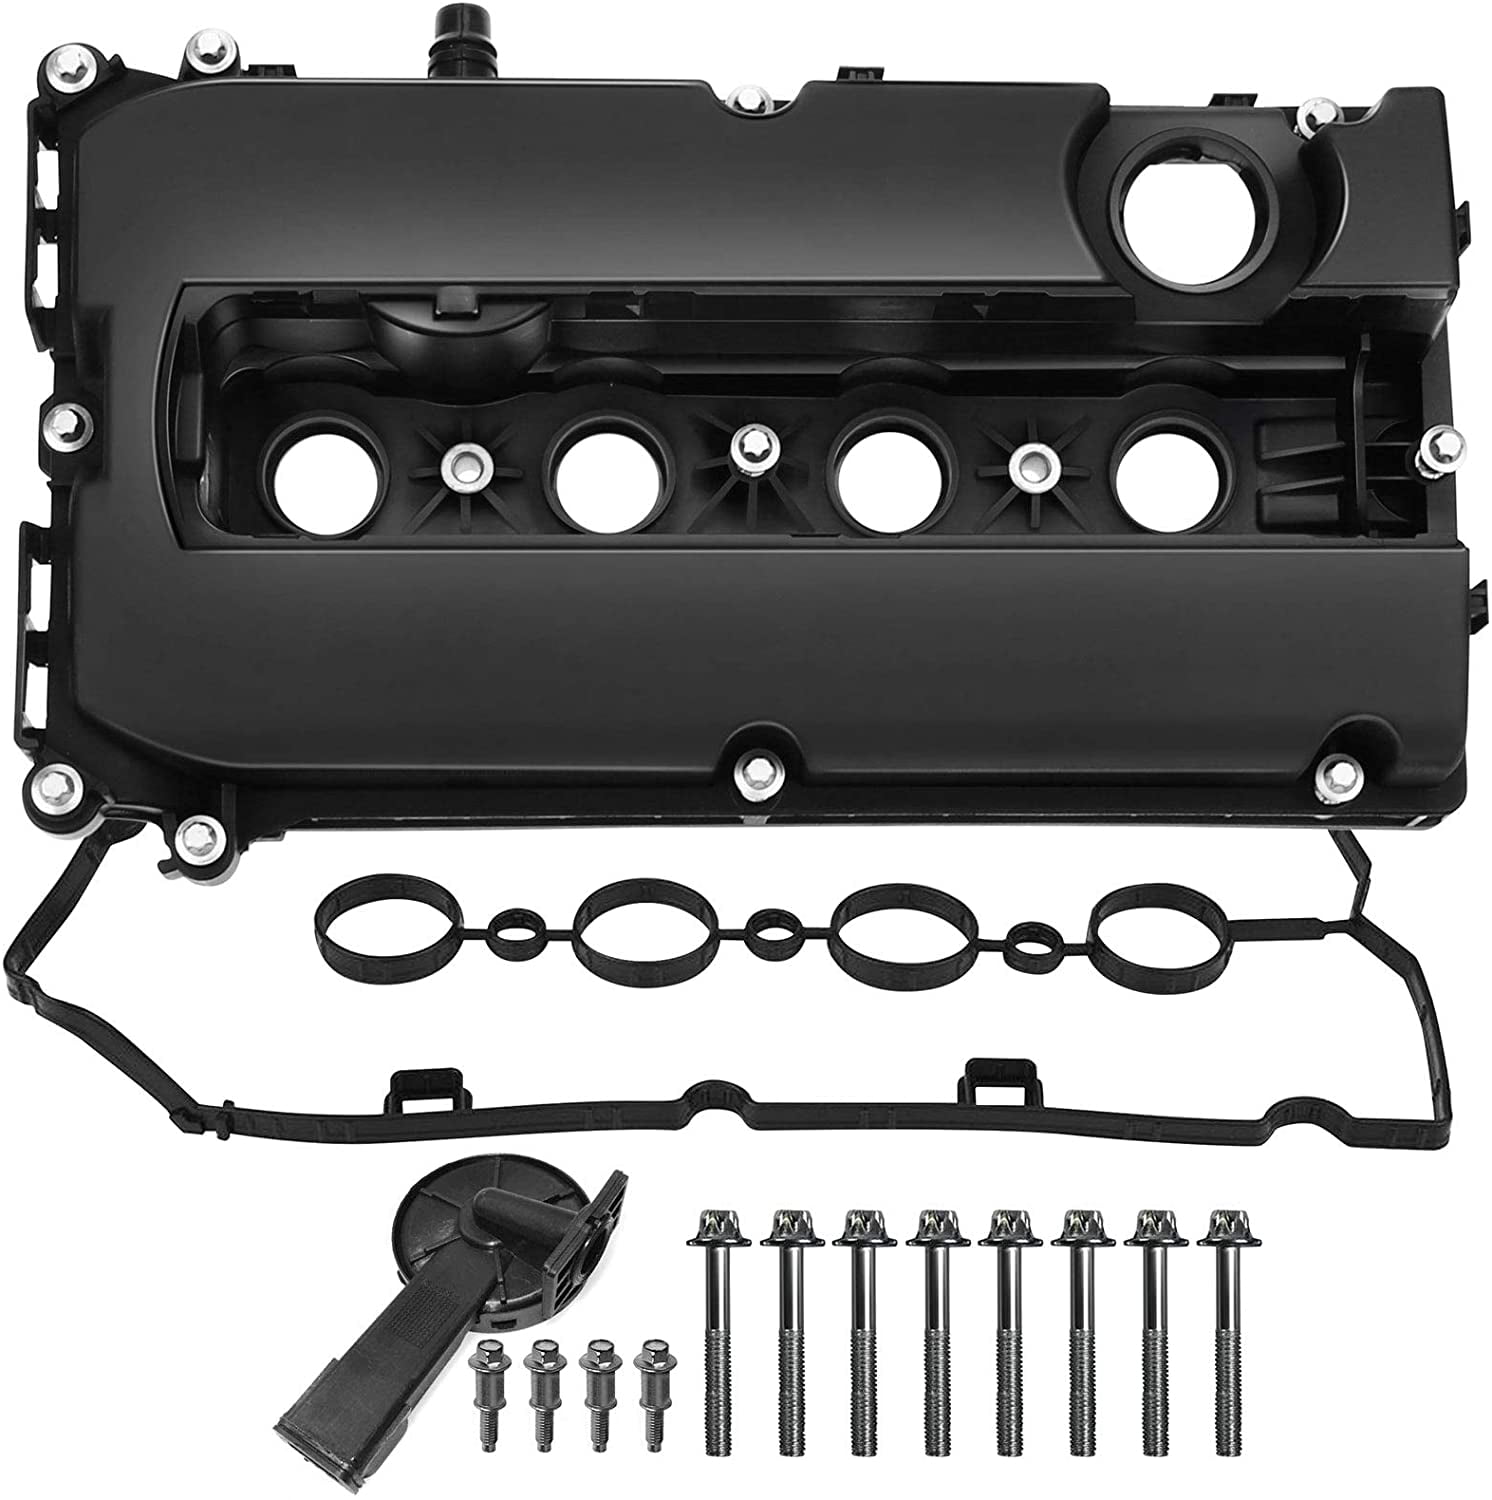 SCITOO Engine Valve Cover with Gasket Replacement for Buick Encore Abarth Volt Chevrolet Cruze Sonic Cadillac ELR 2011-2017 Valve Cover Gasket Set 